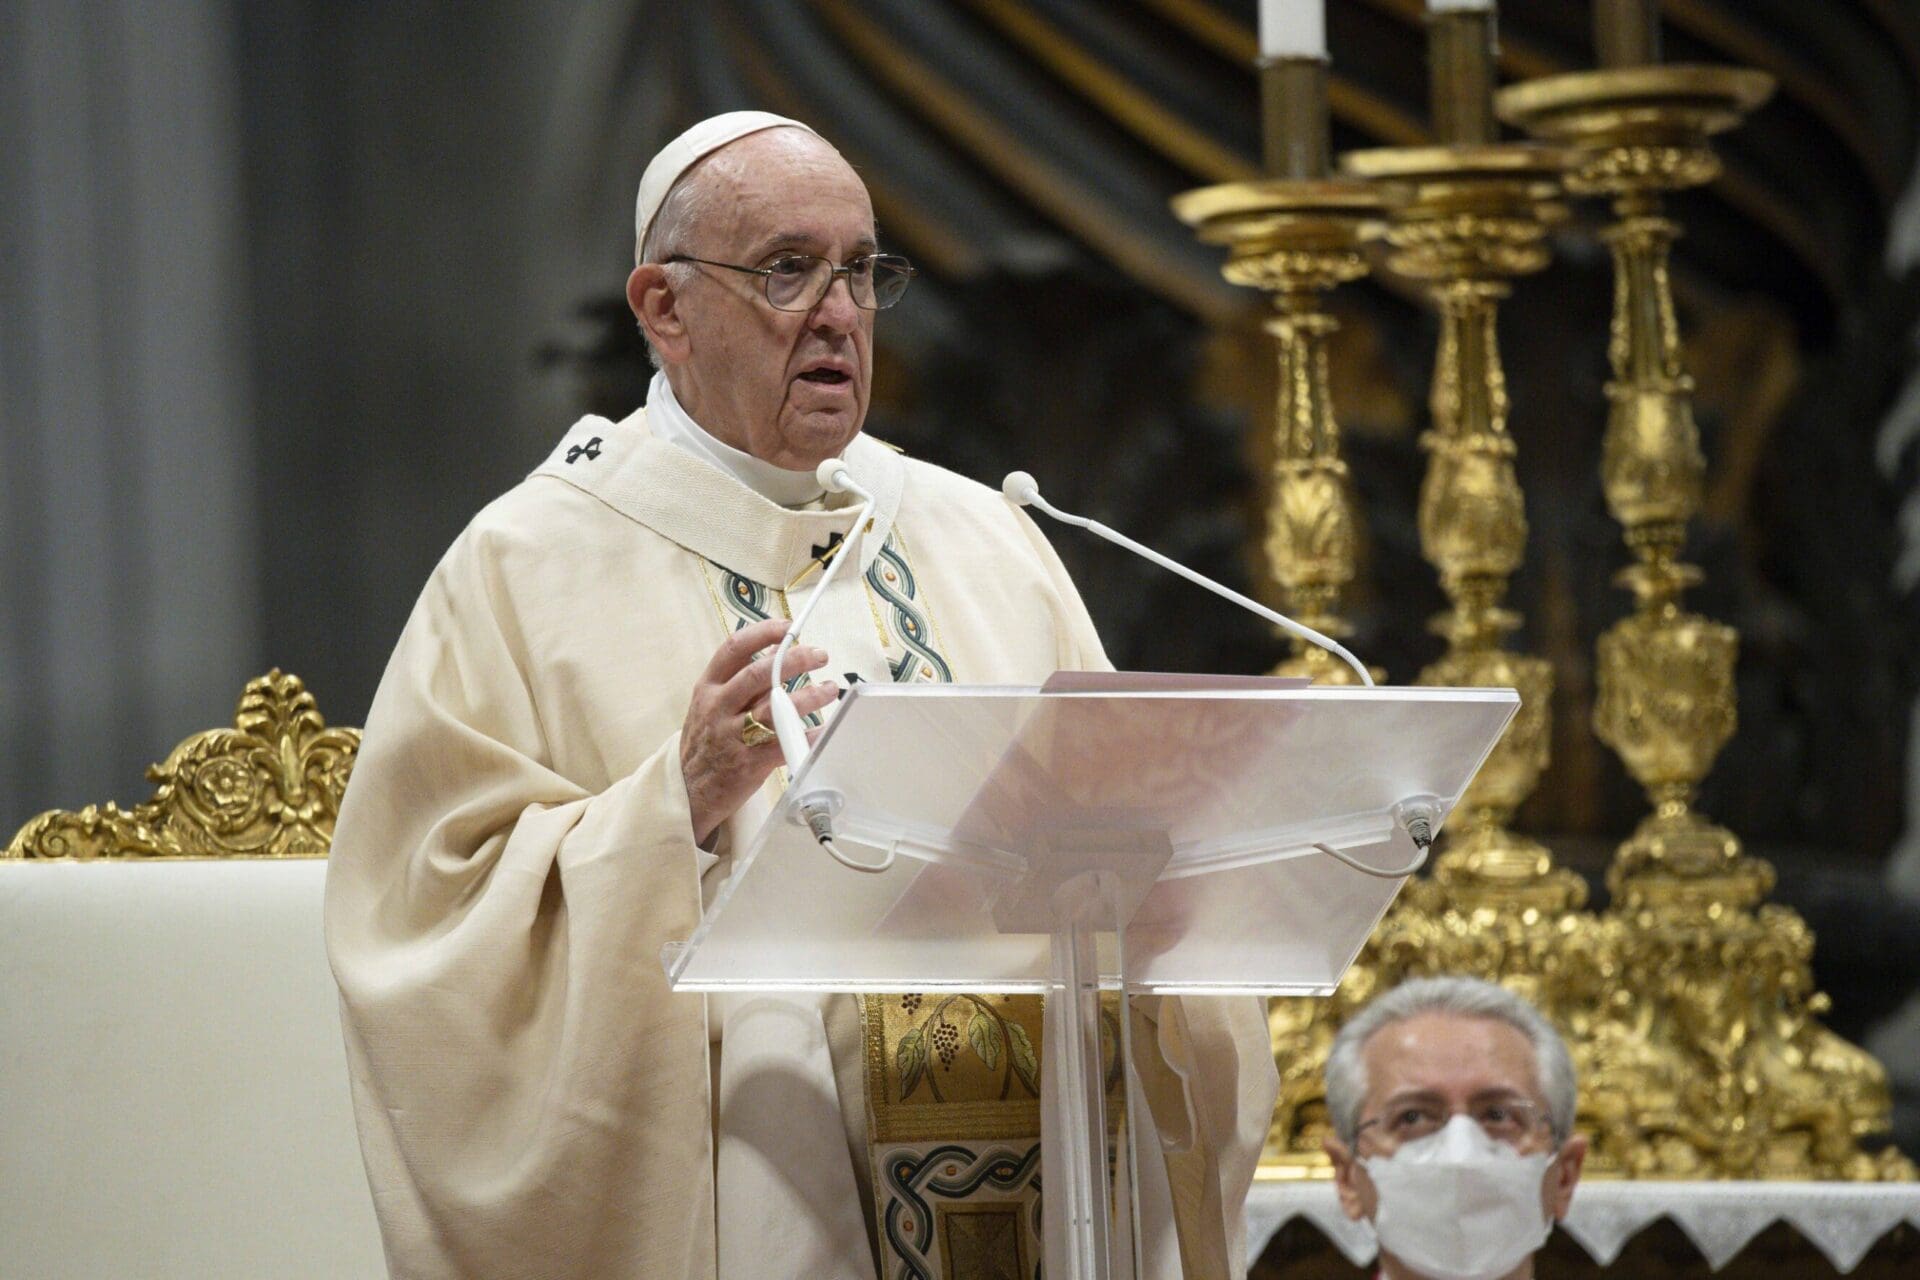 Catholics Disapprove of Limits on Traditional Latin Mass, but Pope Francis Still Popular